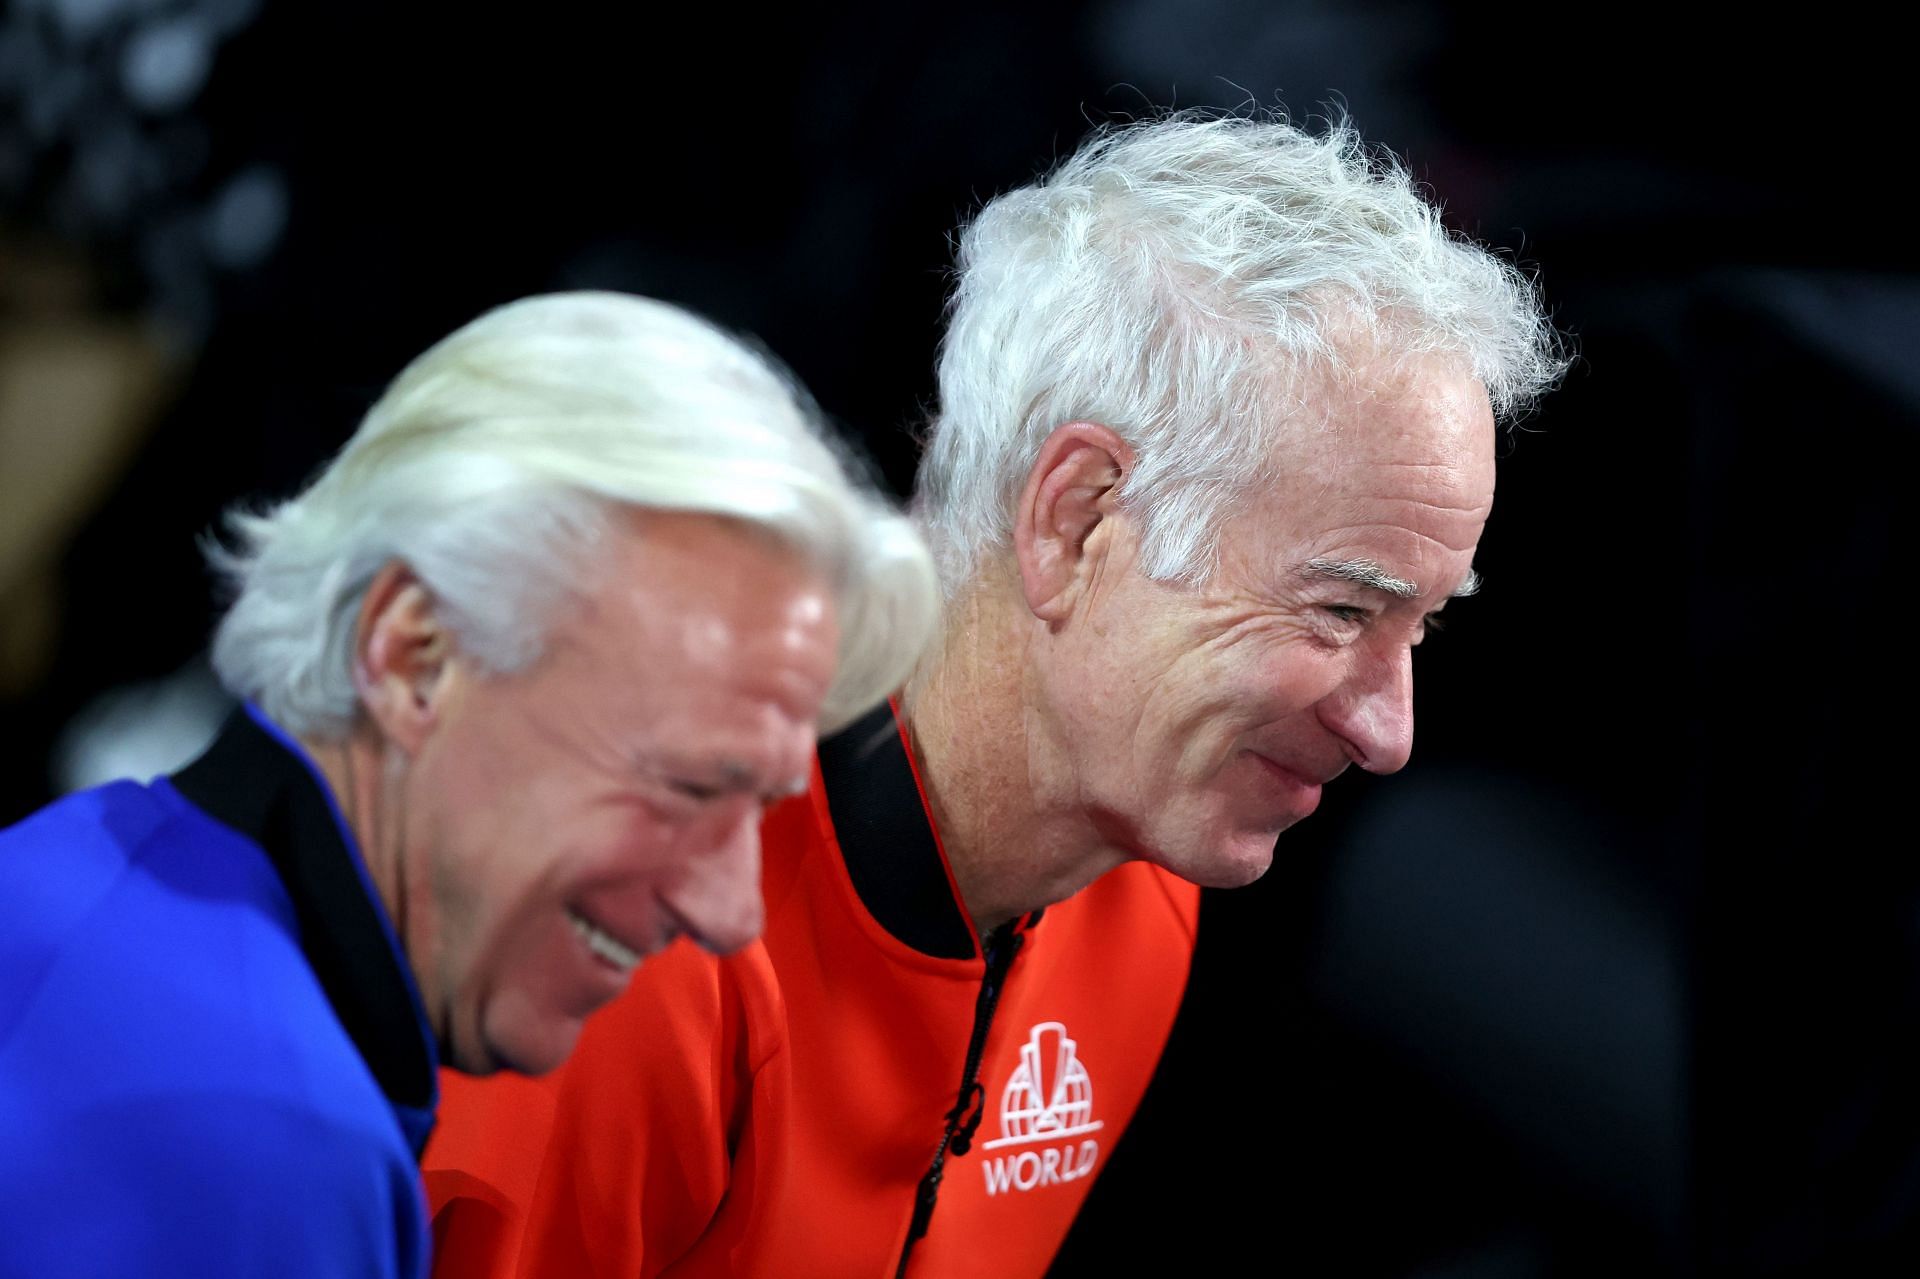 John McEnroe and Bjorn Borg will captain the teams at the Laver Cup